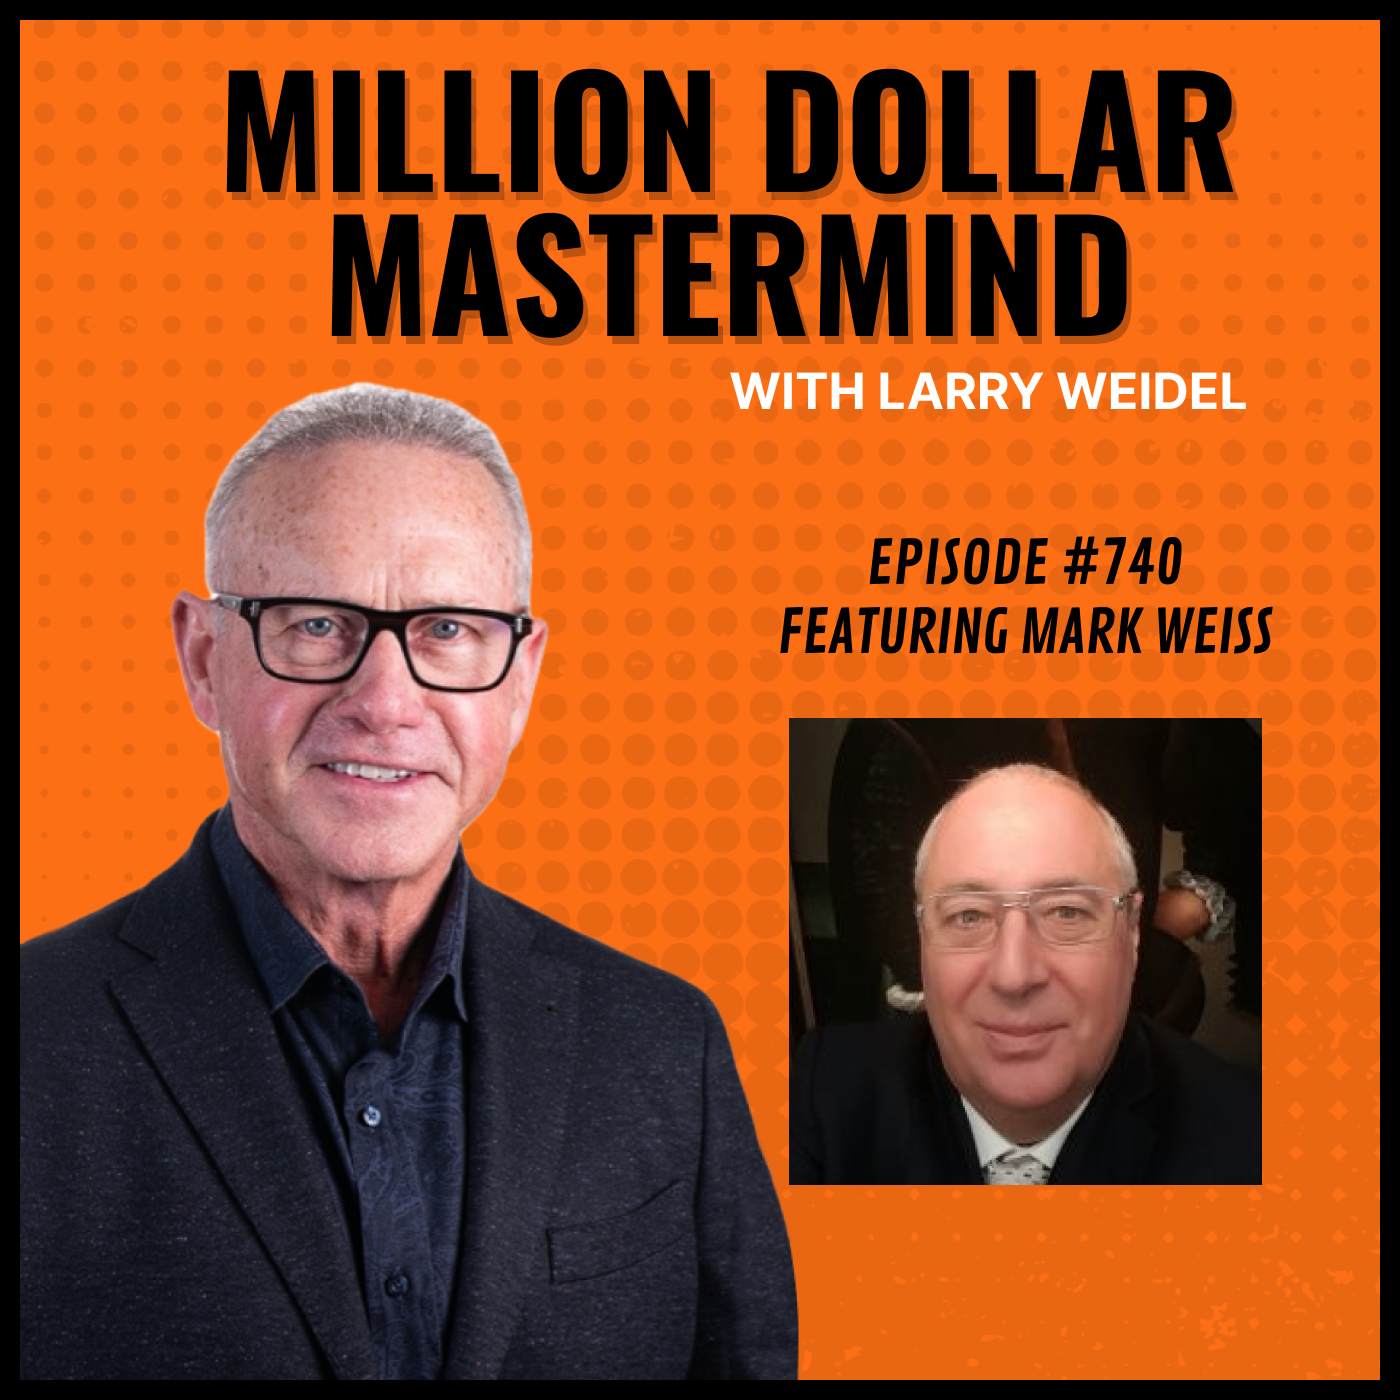 Episode #740 - The Power Of Teamwork And Risk-Taking with Mark Weiss, Owner of The Weiss Gallery